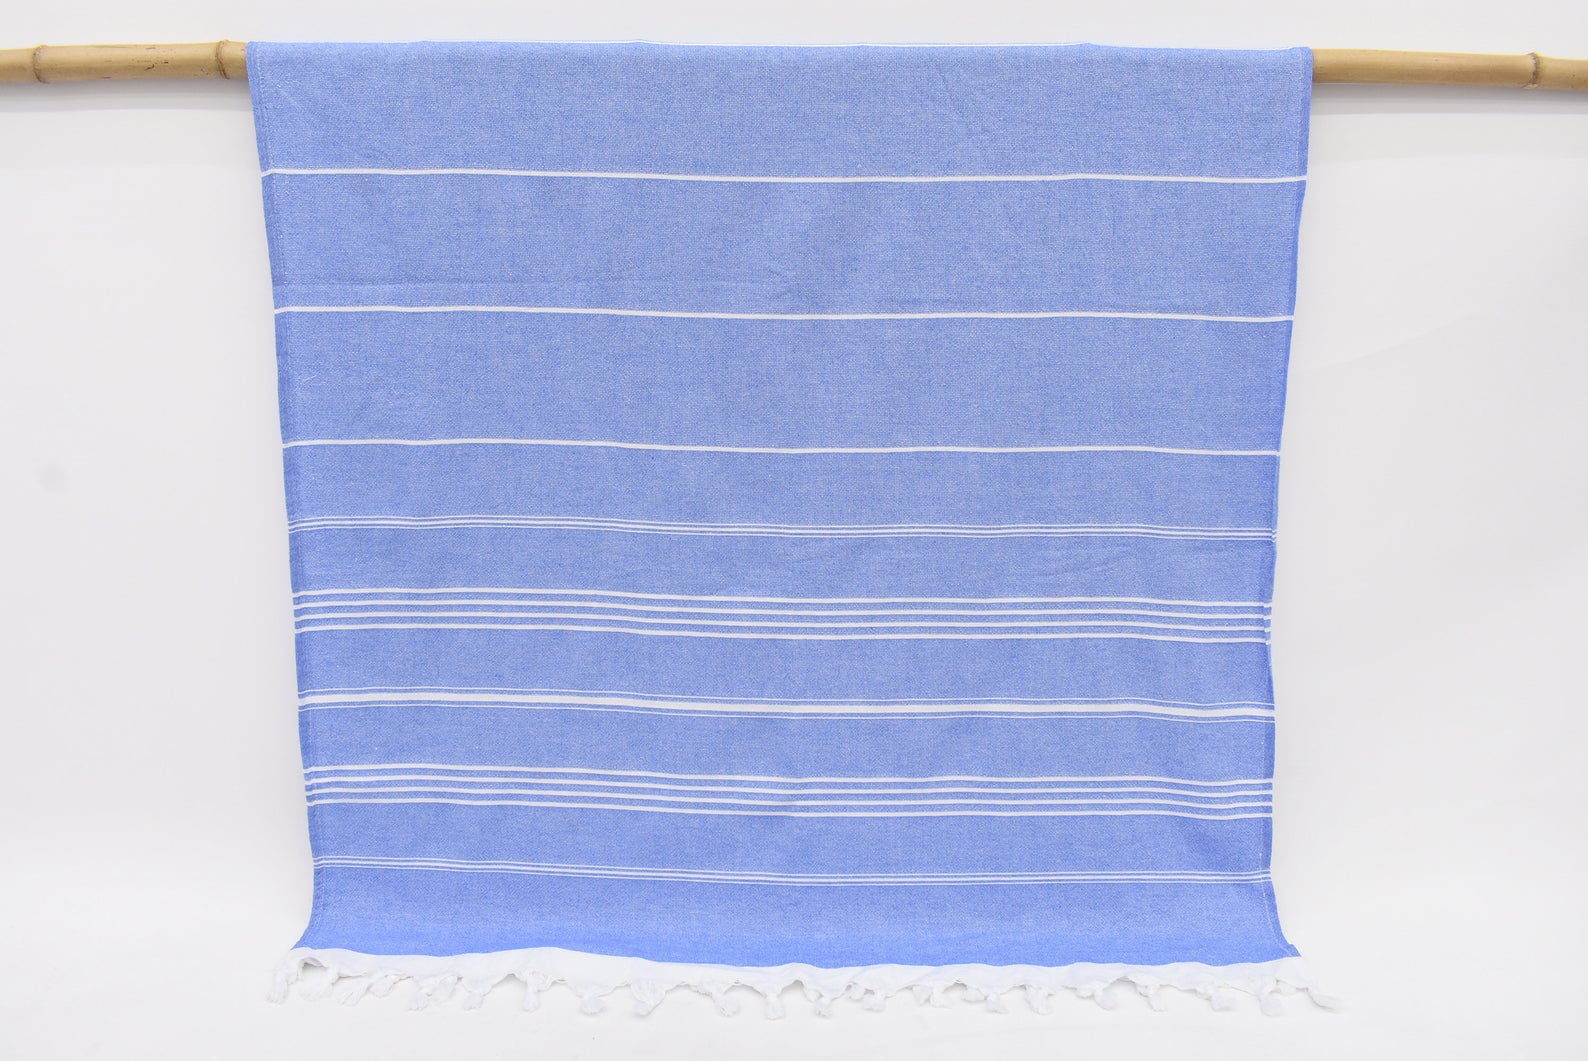 Beach Terry Towels